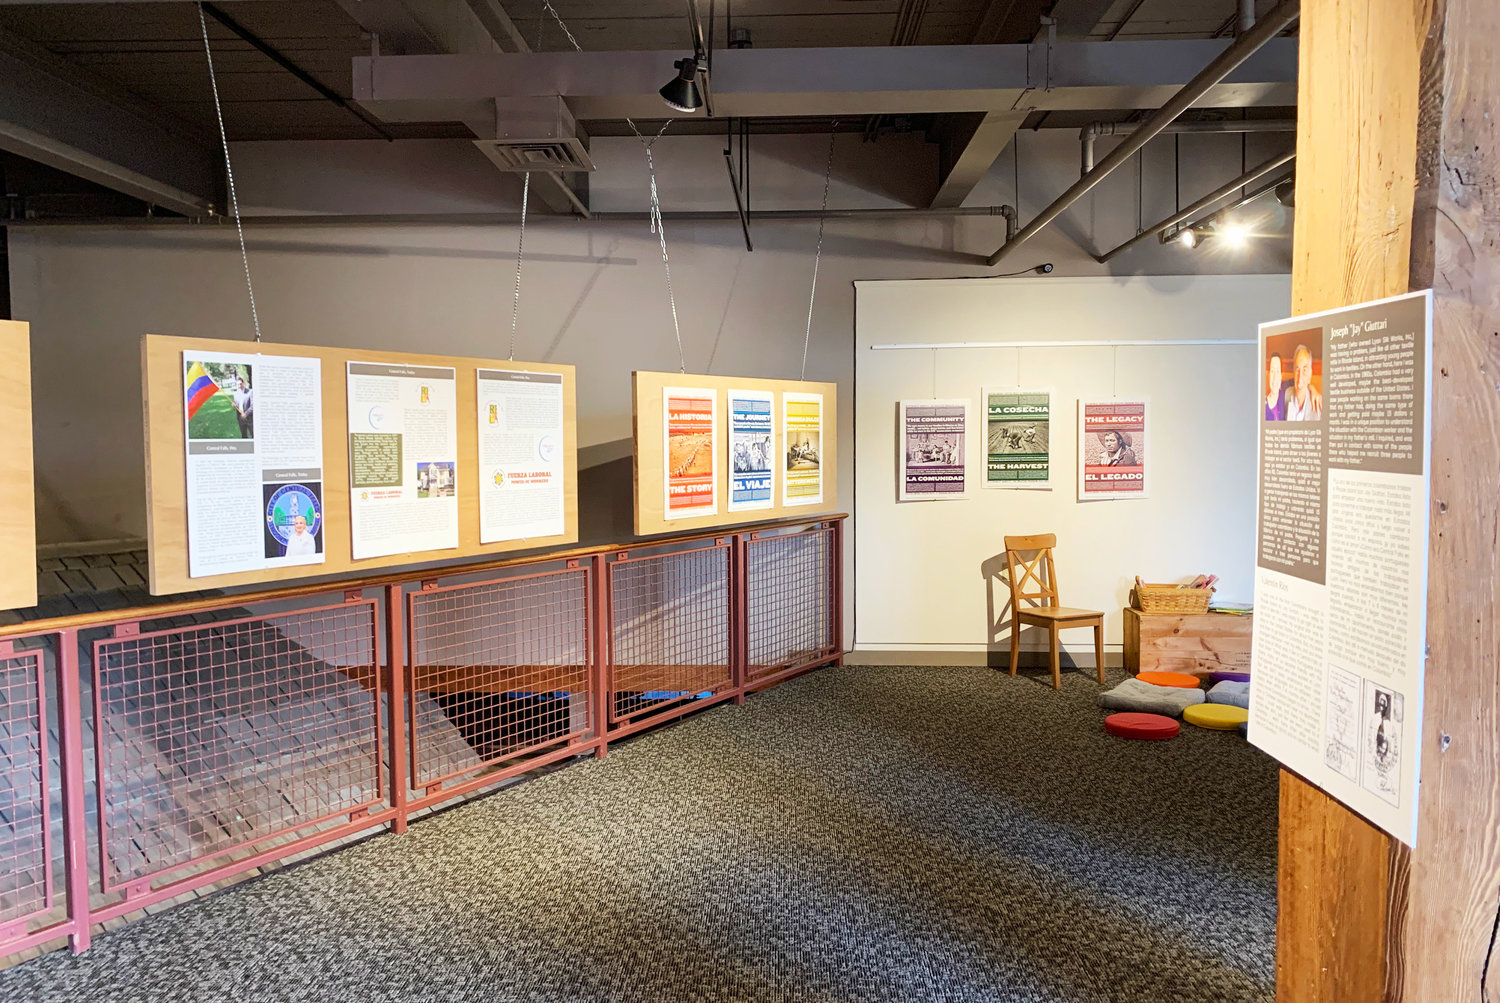 Two exhibits exploring the history of Latino settlement in Rhode Island are on view at the Museum of Work and Culture through September 24